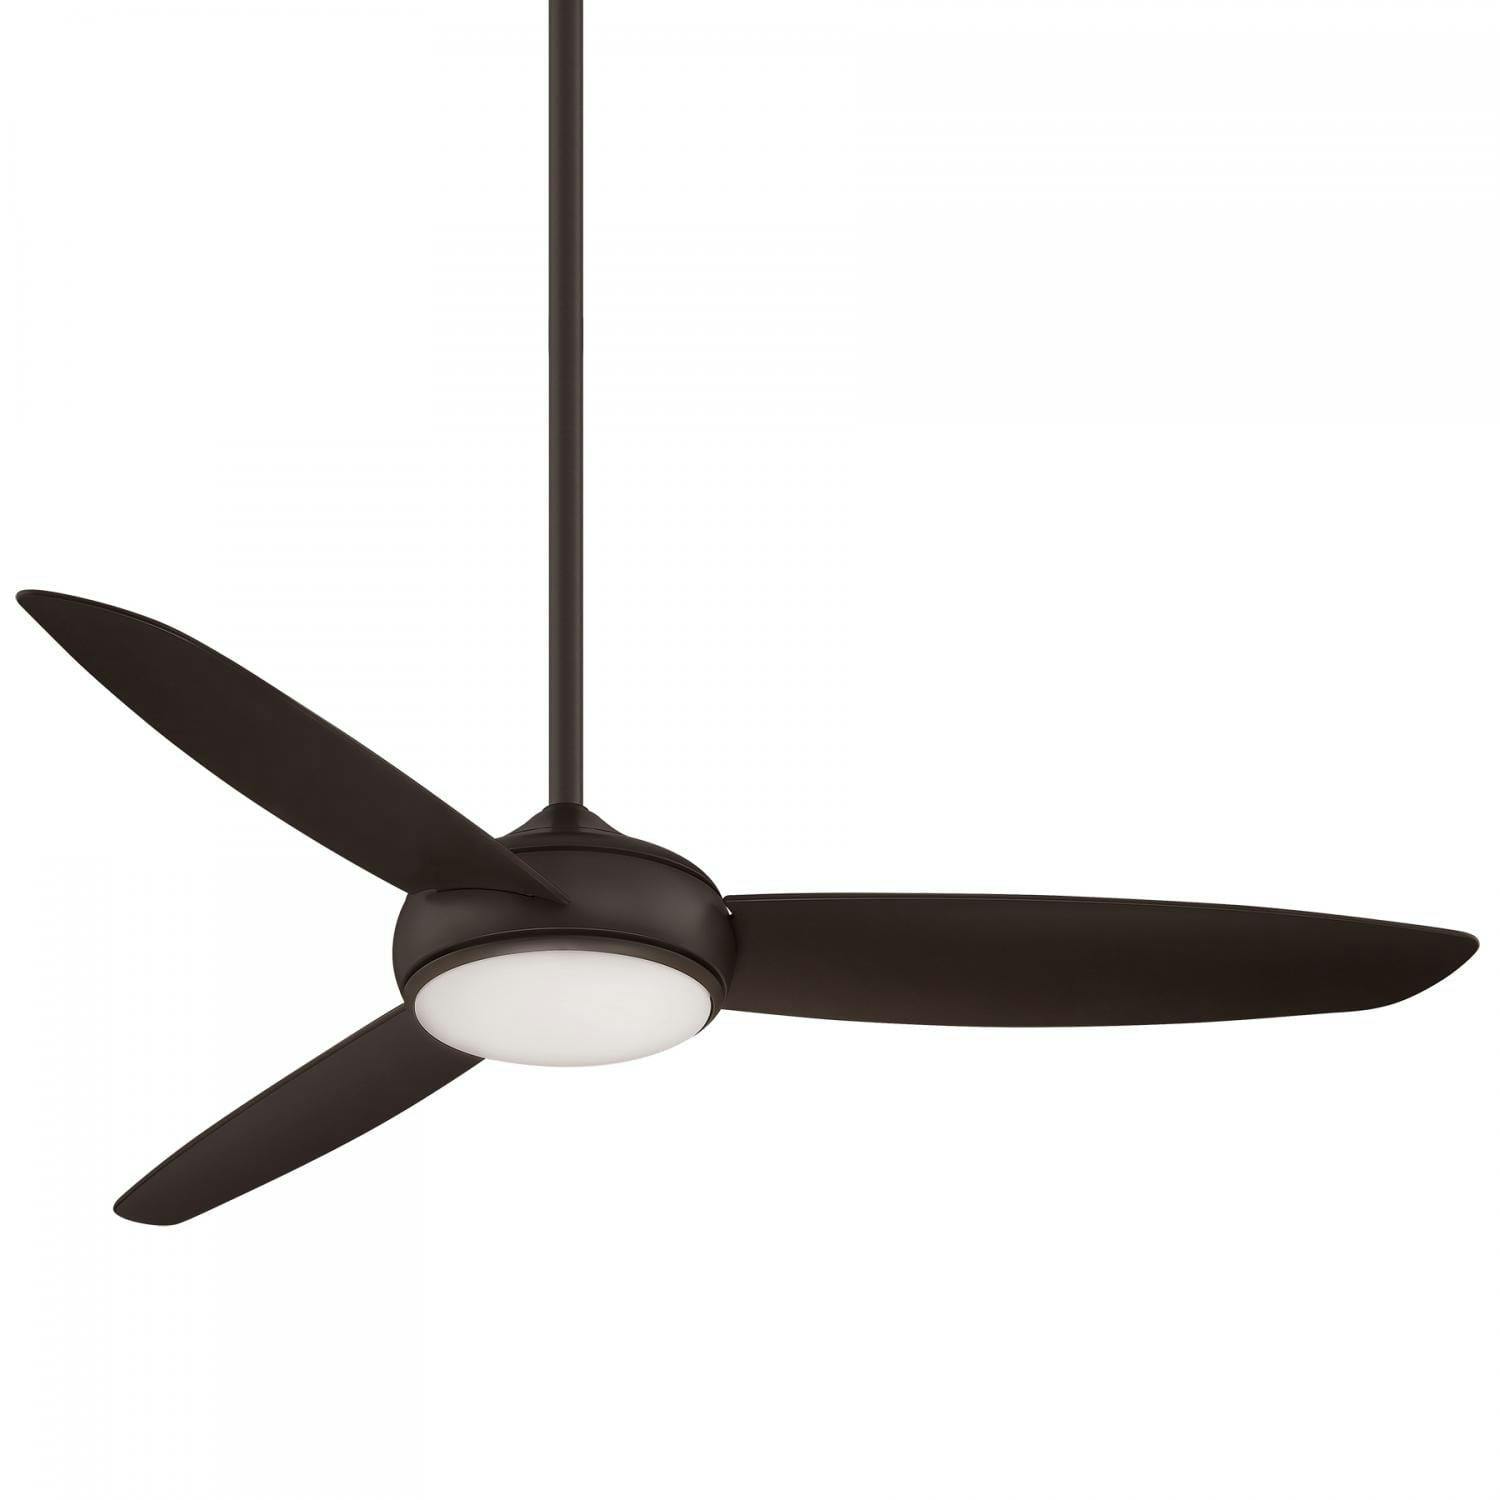 54" Smart LED Ceiling Fan in Oil Rubbed Bronze with Etched Opal Glass